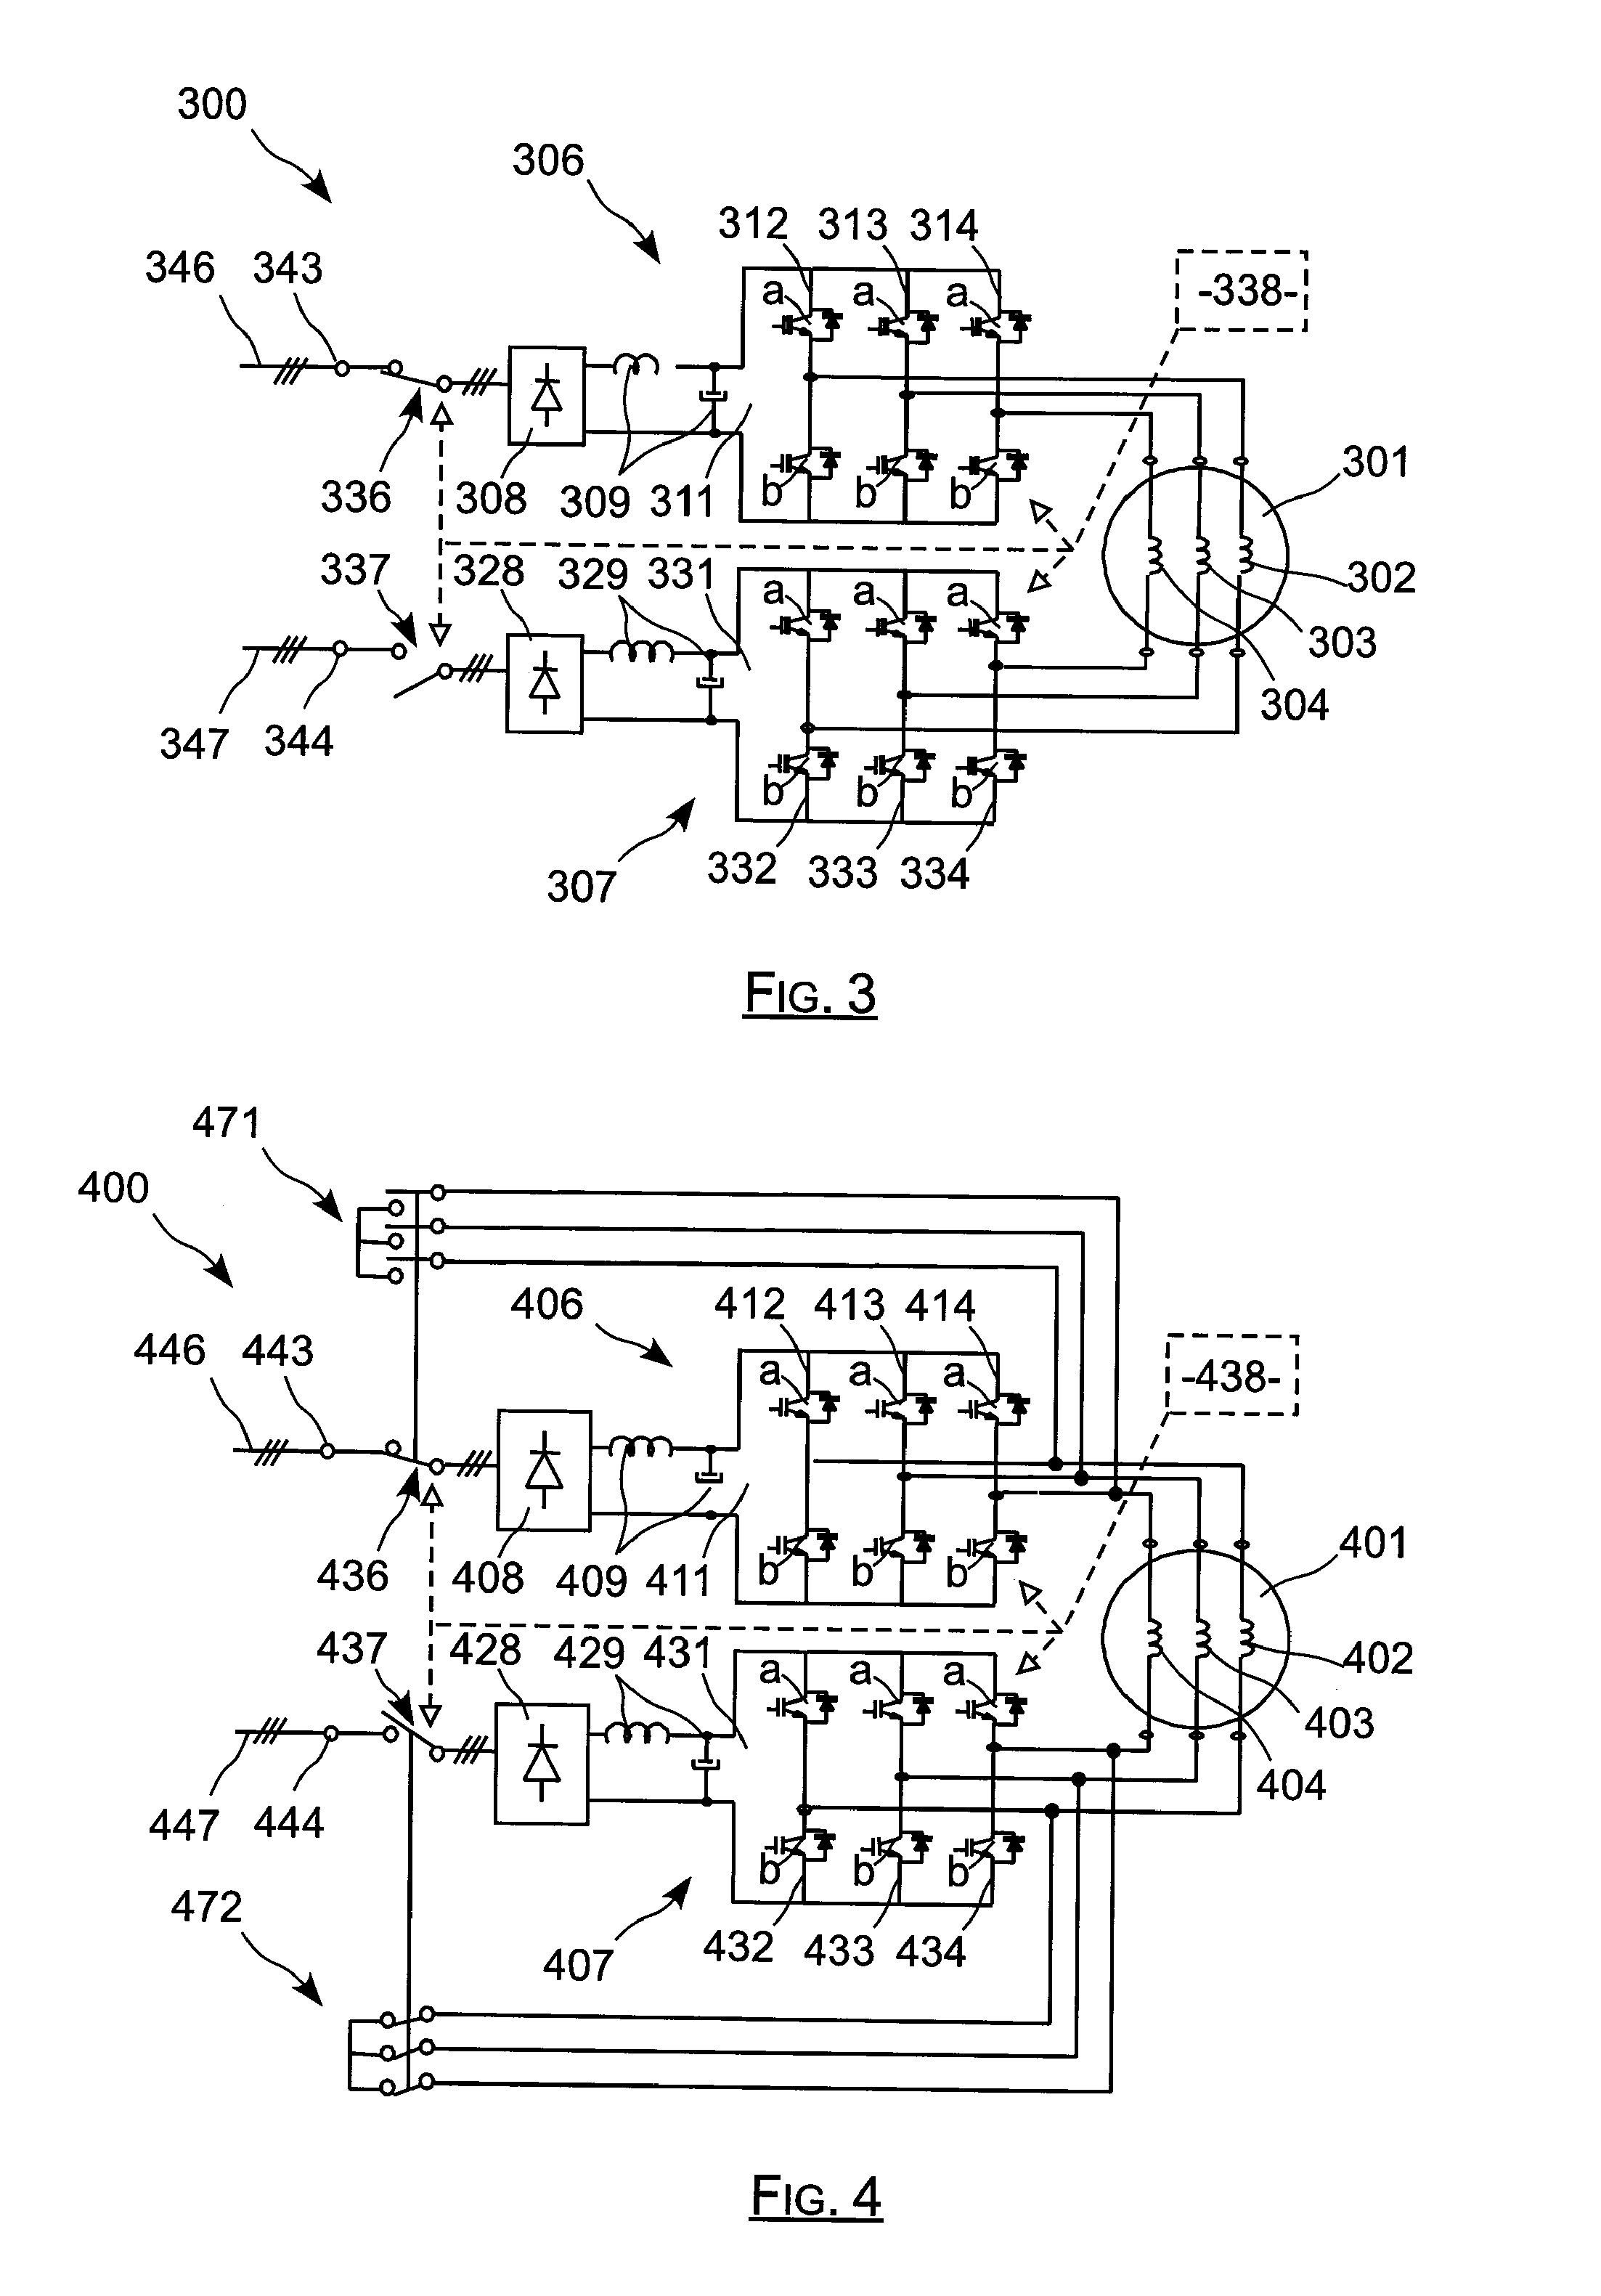 Electric actuator including two current-controlled voltage inverters powering an electric machine, and reconfigurable in the presence of a defect